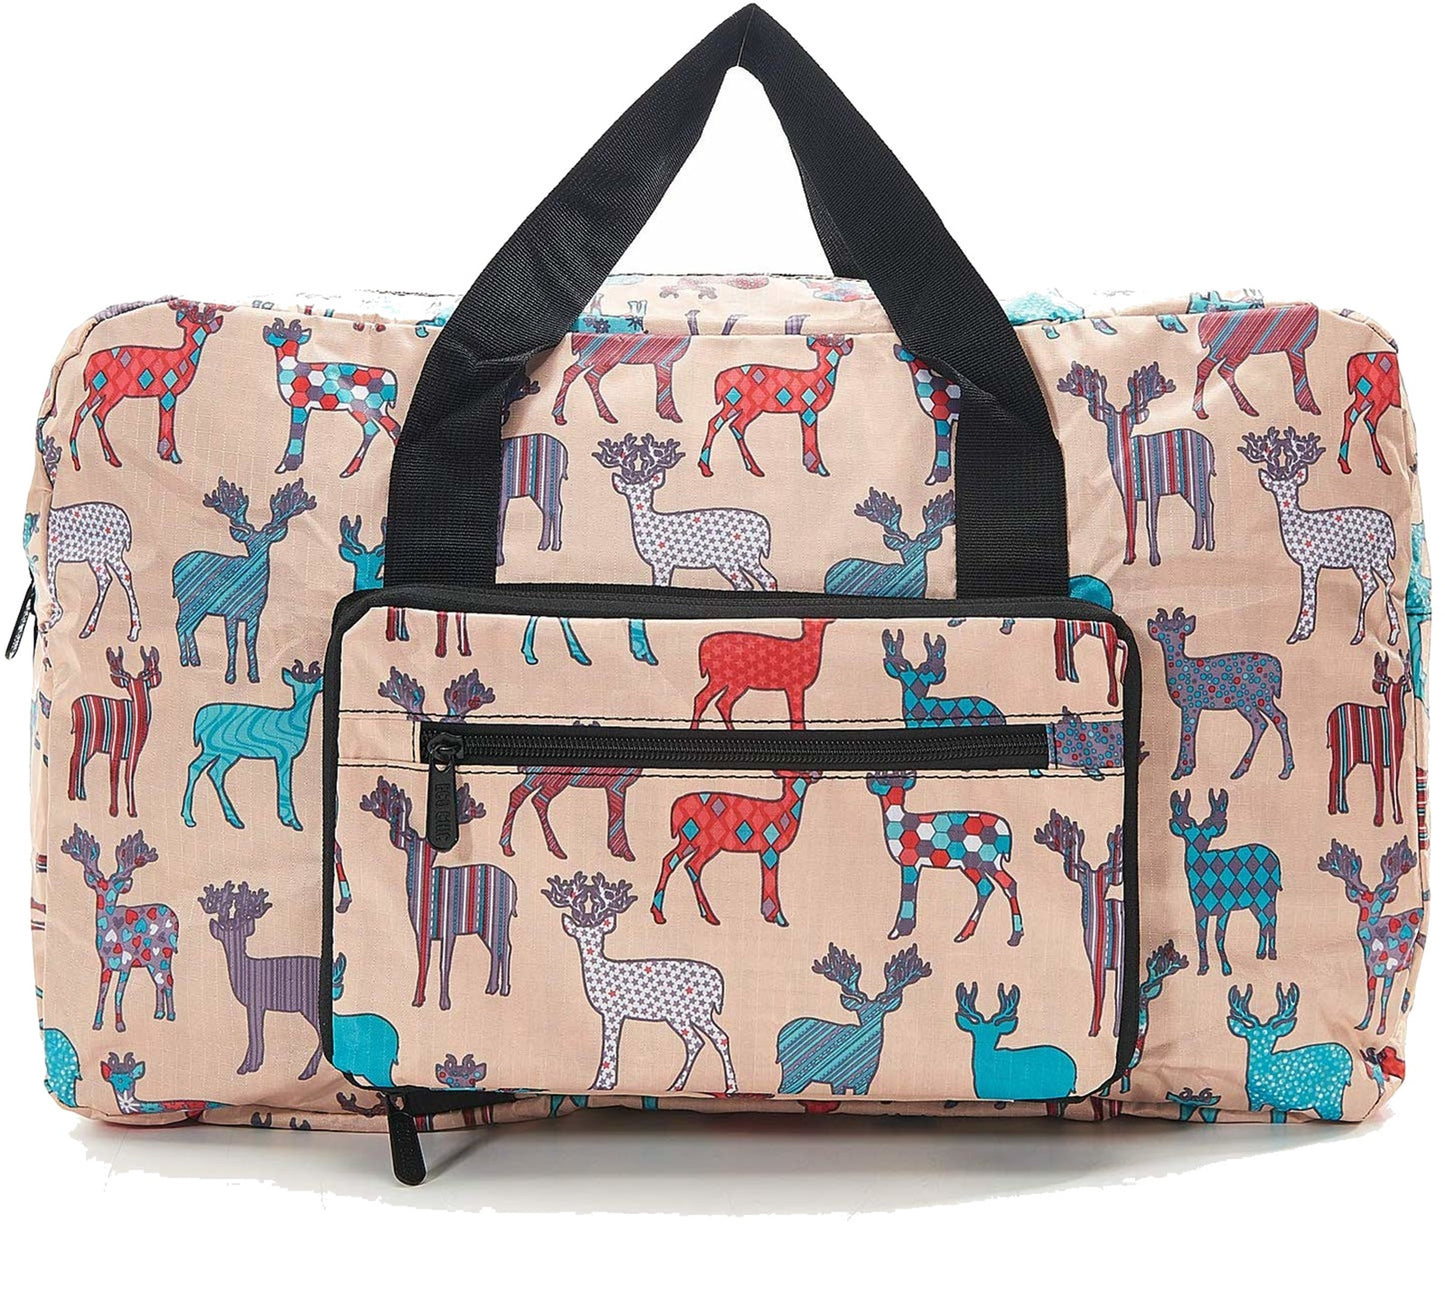 Eco Chic foldaway Holdall with Stag design Beige